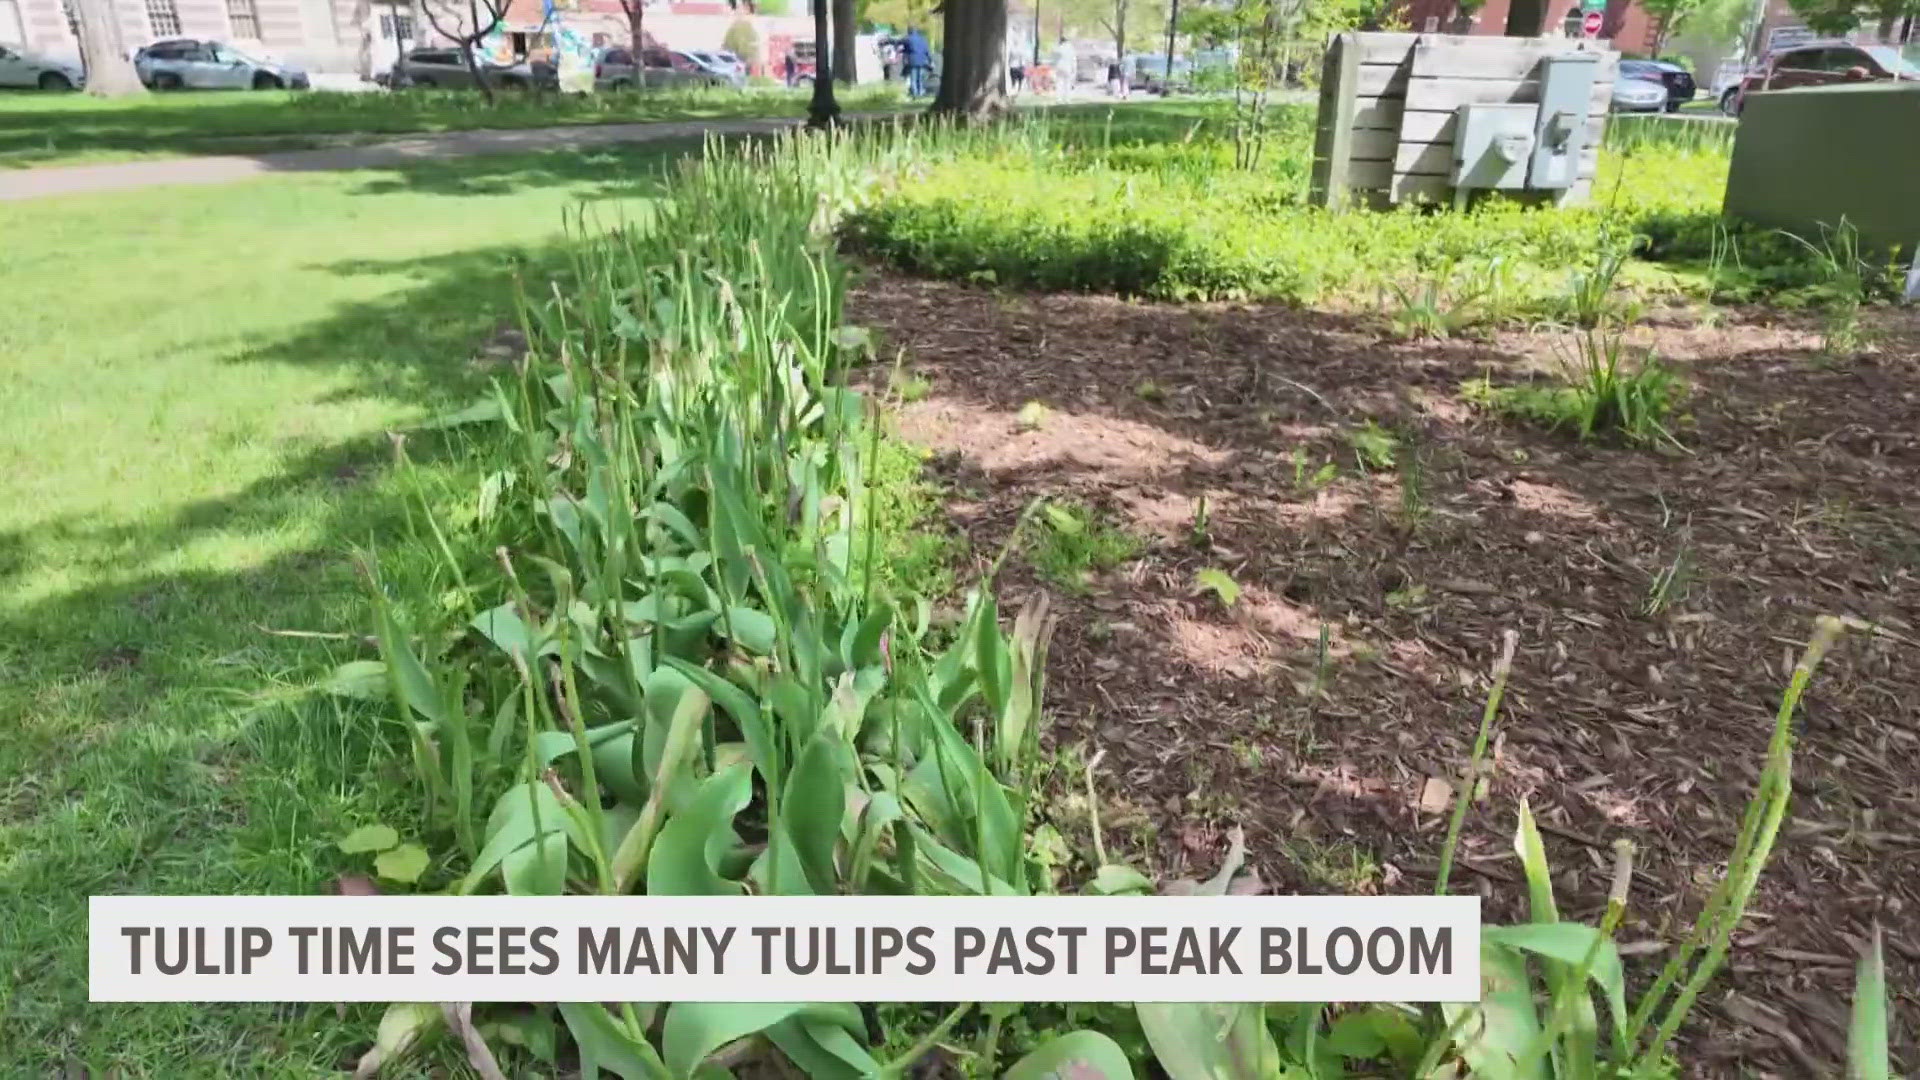 If you were planning on checking out Tulip Time this week, you might want to temper your expectations.